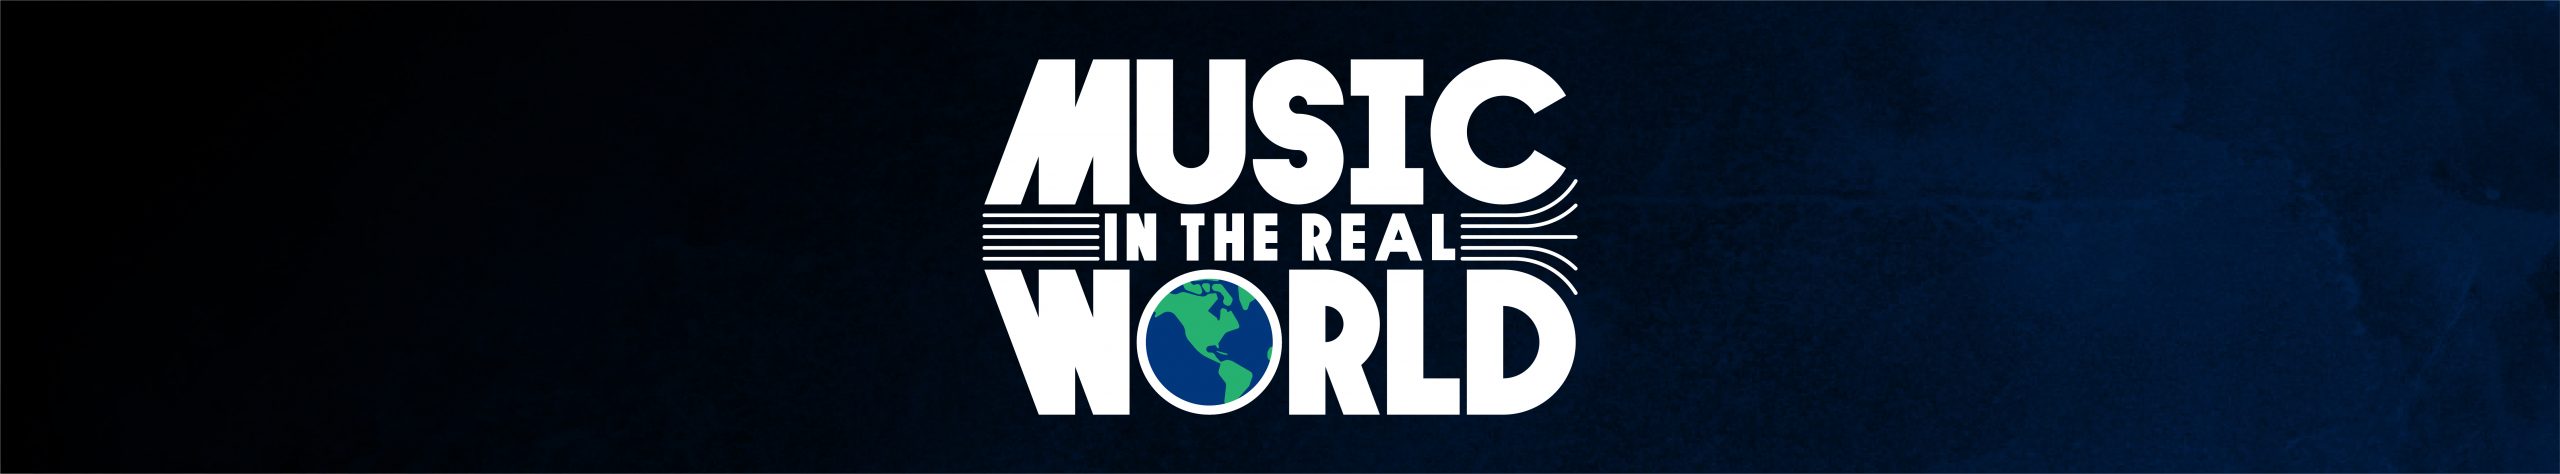 Music In The Real World, logo banner